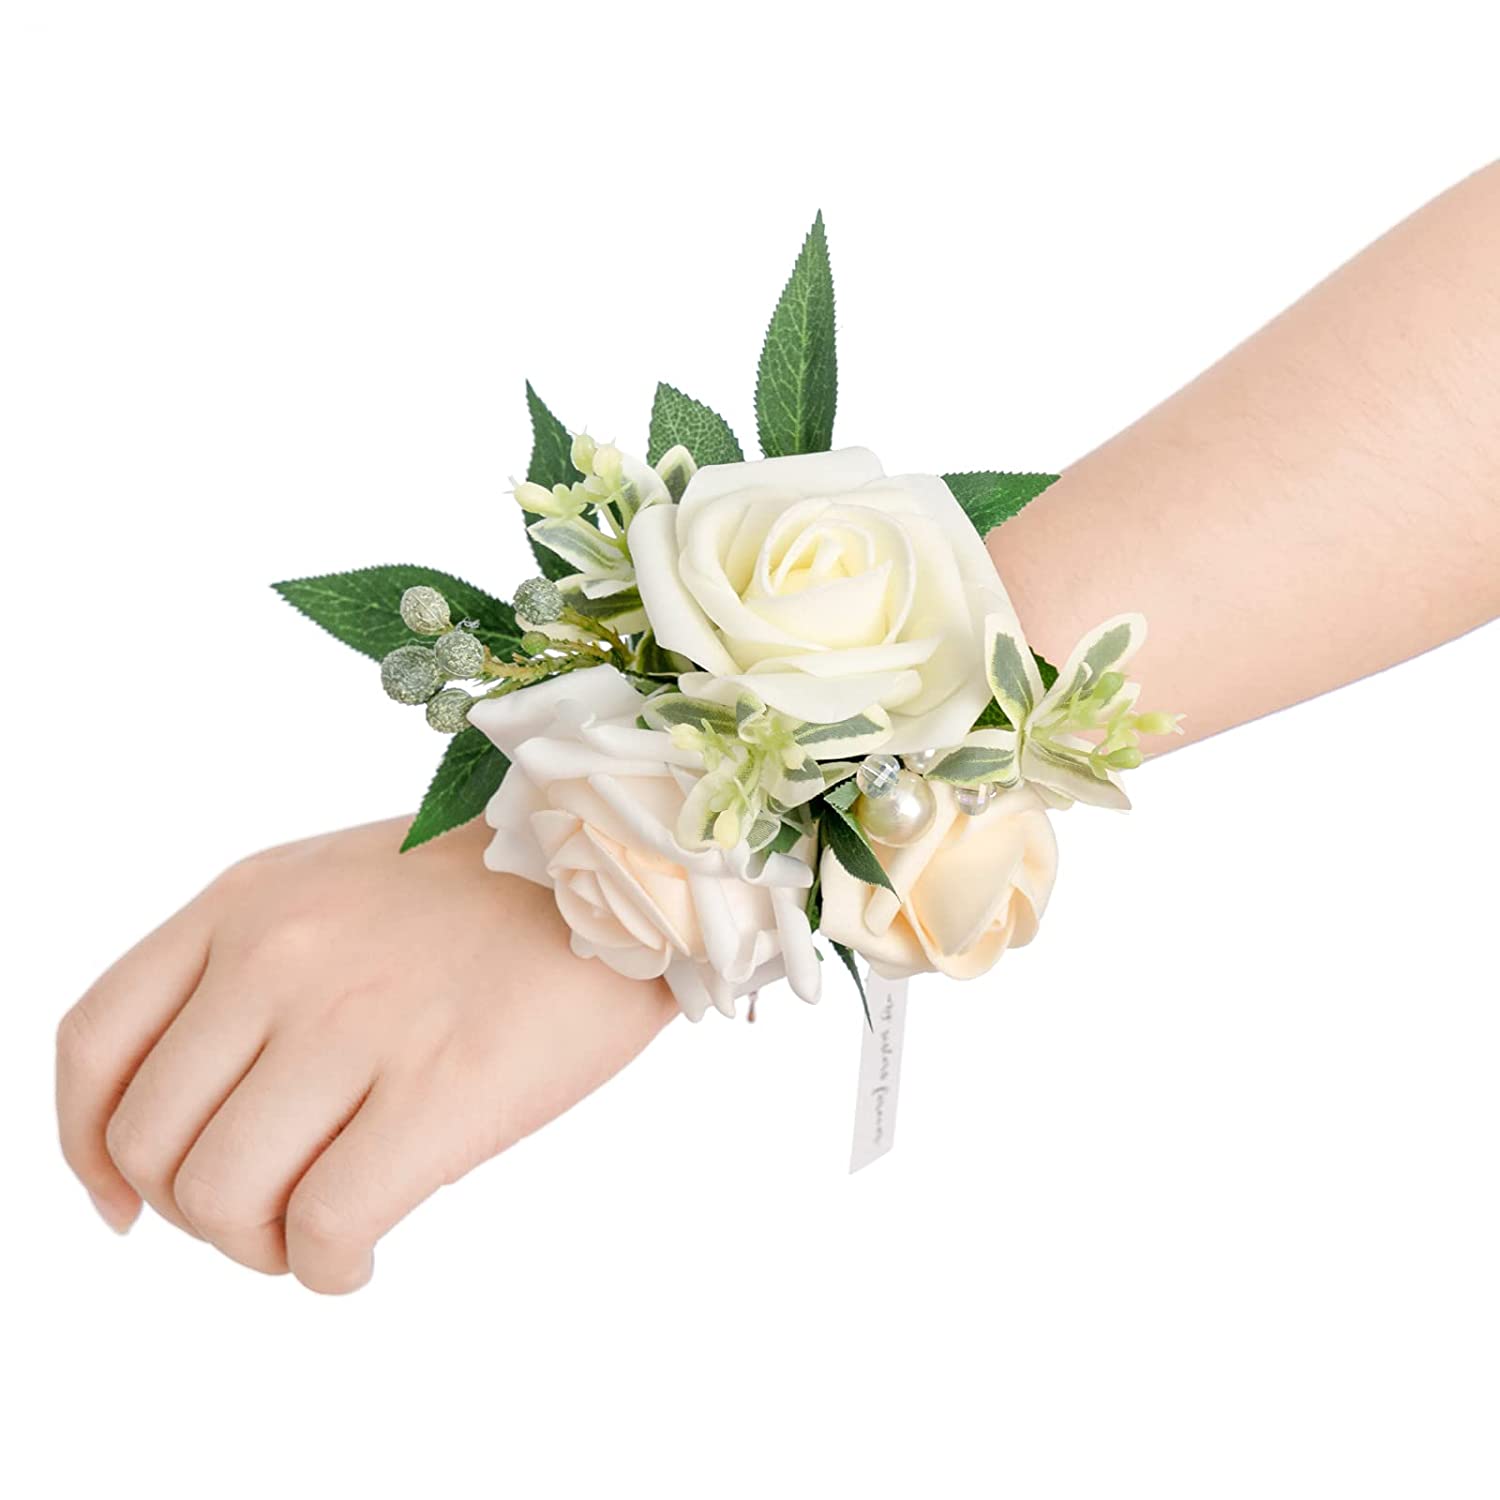 Ling's Moment Wrist Corsages for Wedding, Ivory & Cream Corsages for Mother of Bride and Groom - Set of 2 Flowers